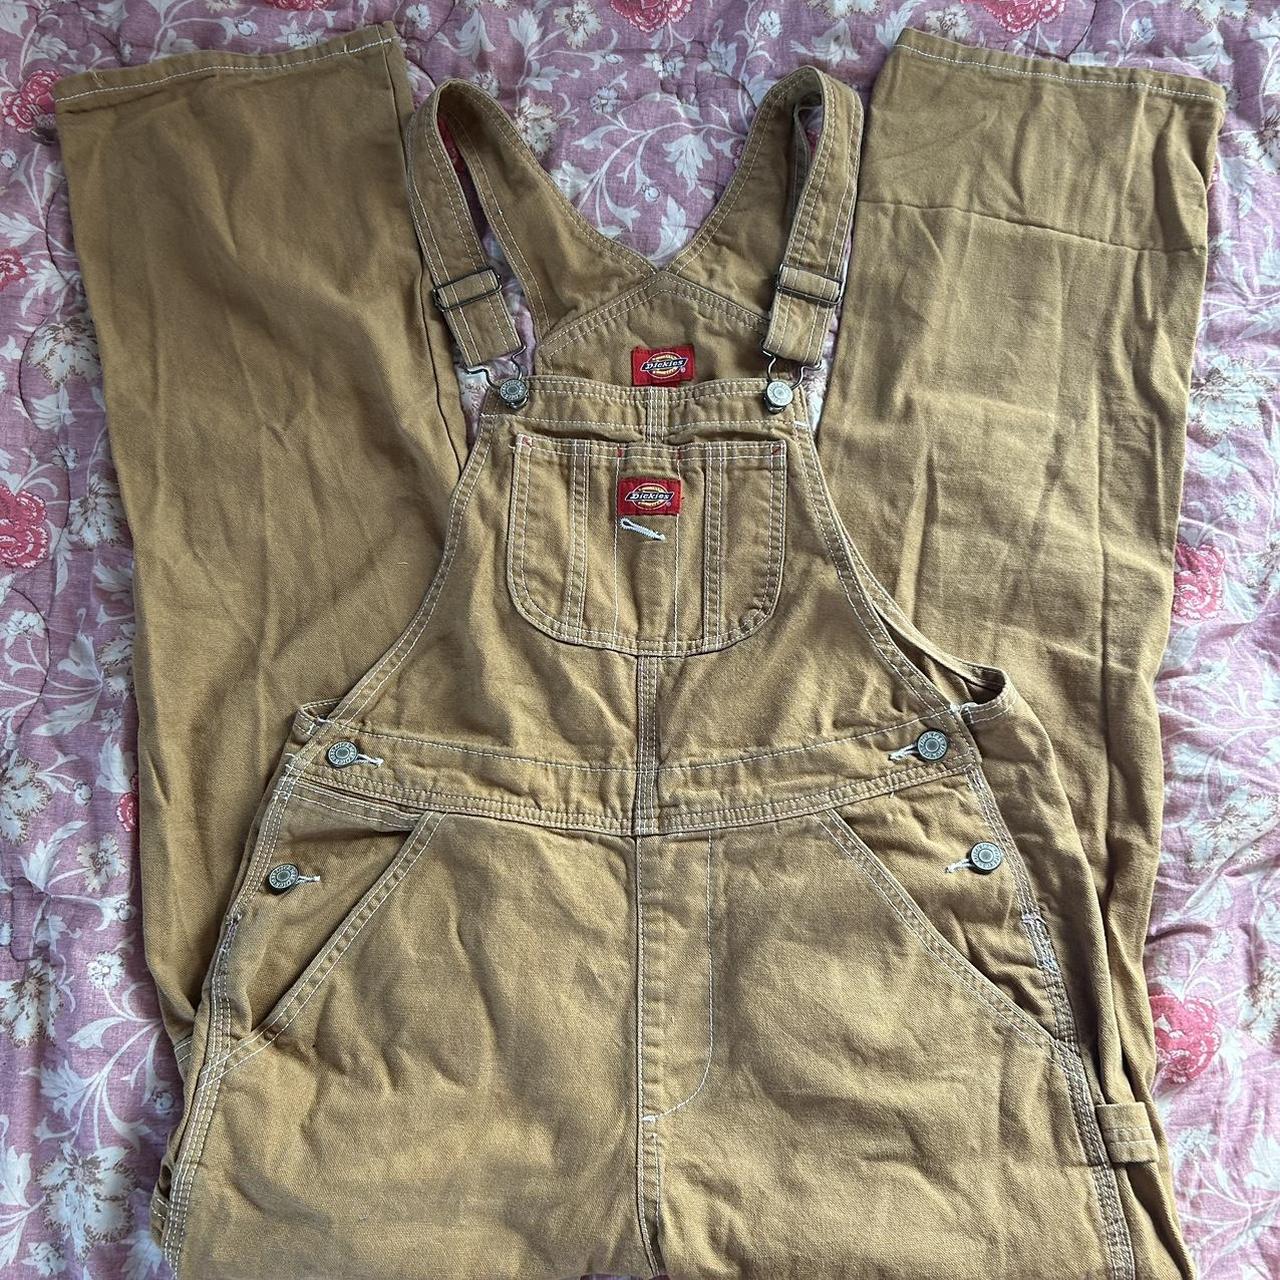 Dickies Women's Tan and Brown Dungarees-overalls